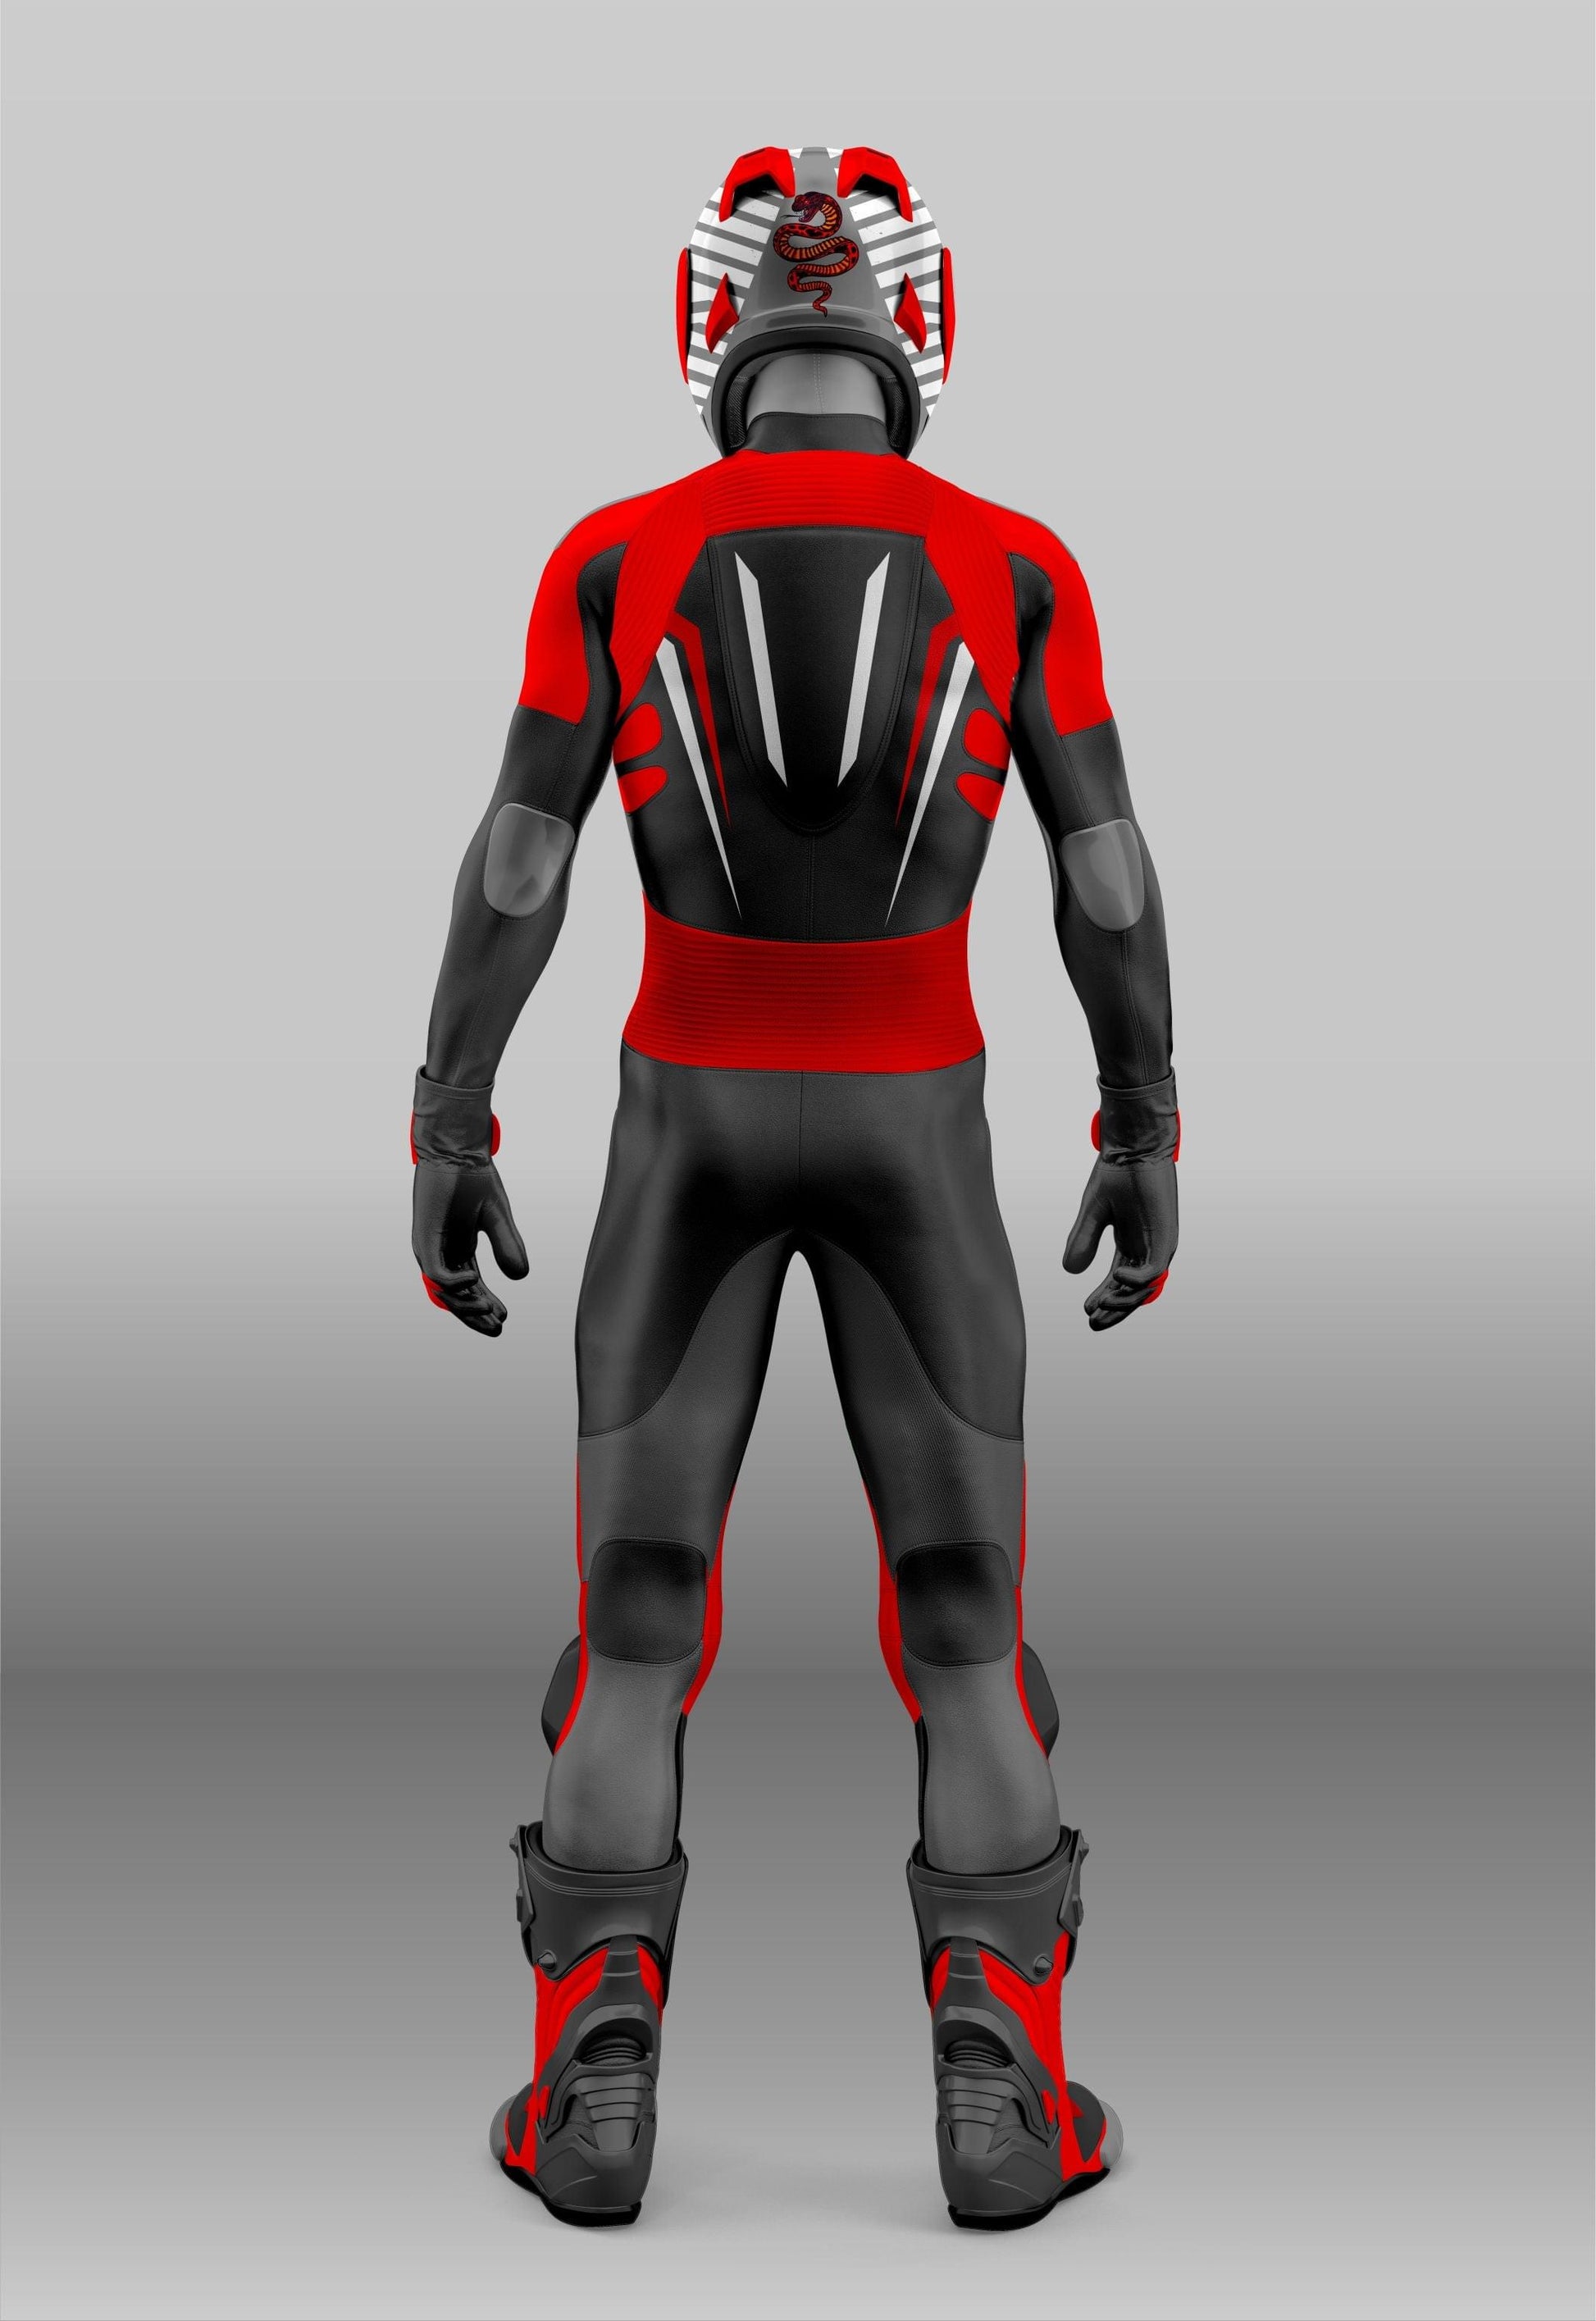 Black and Red Color Custom Design Motorcycle Racing Leather Suit